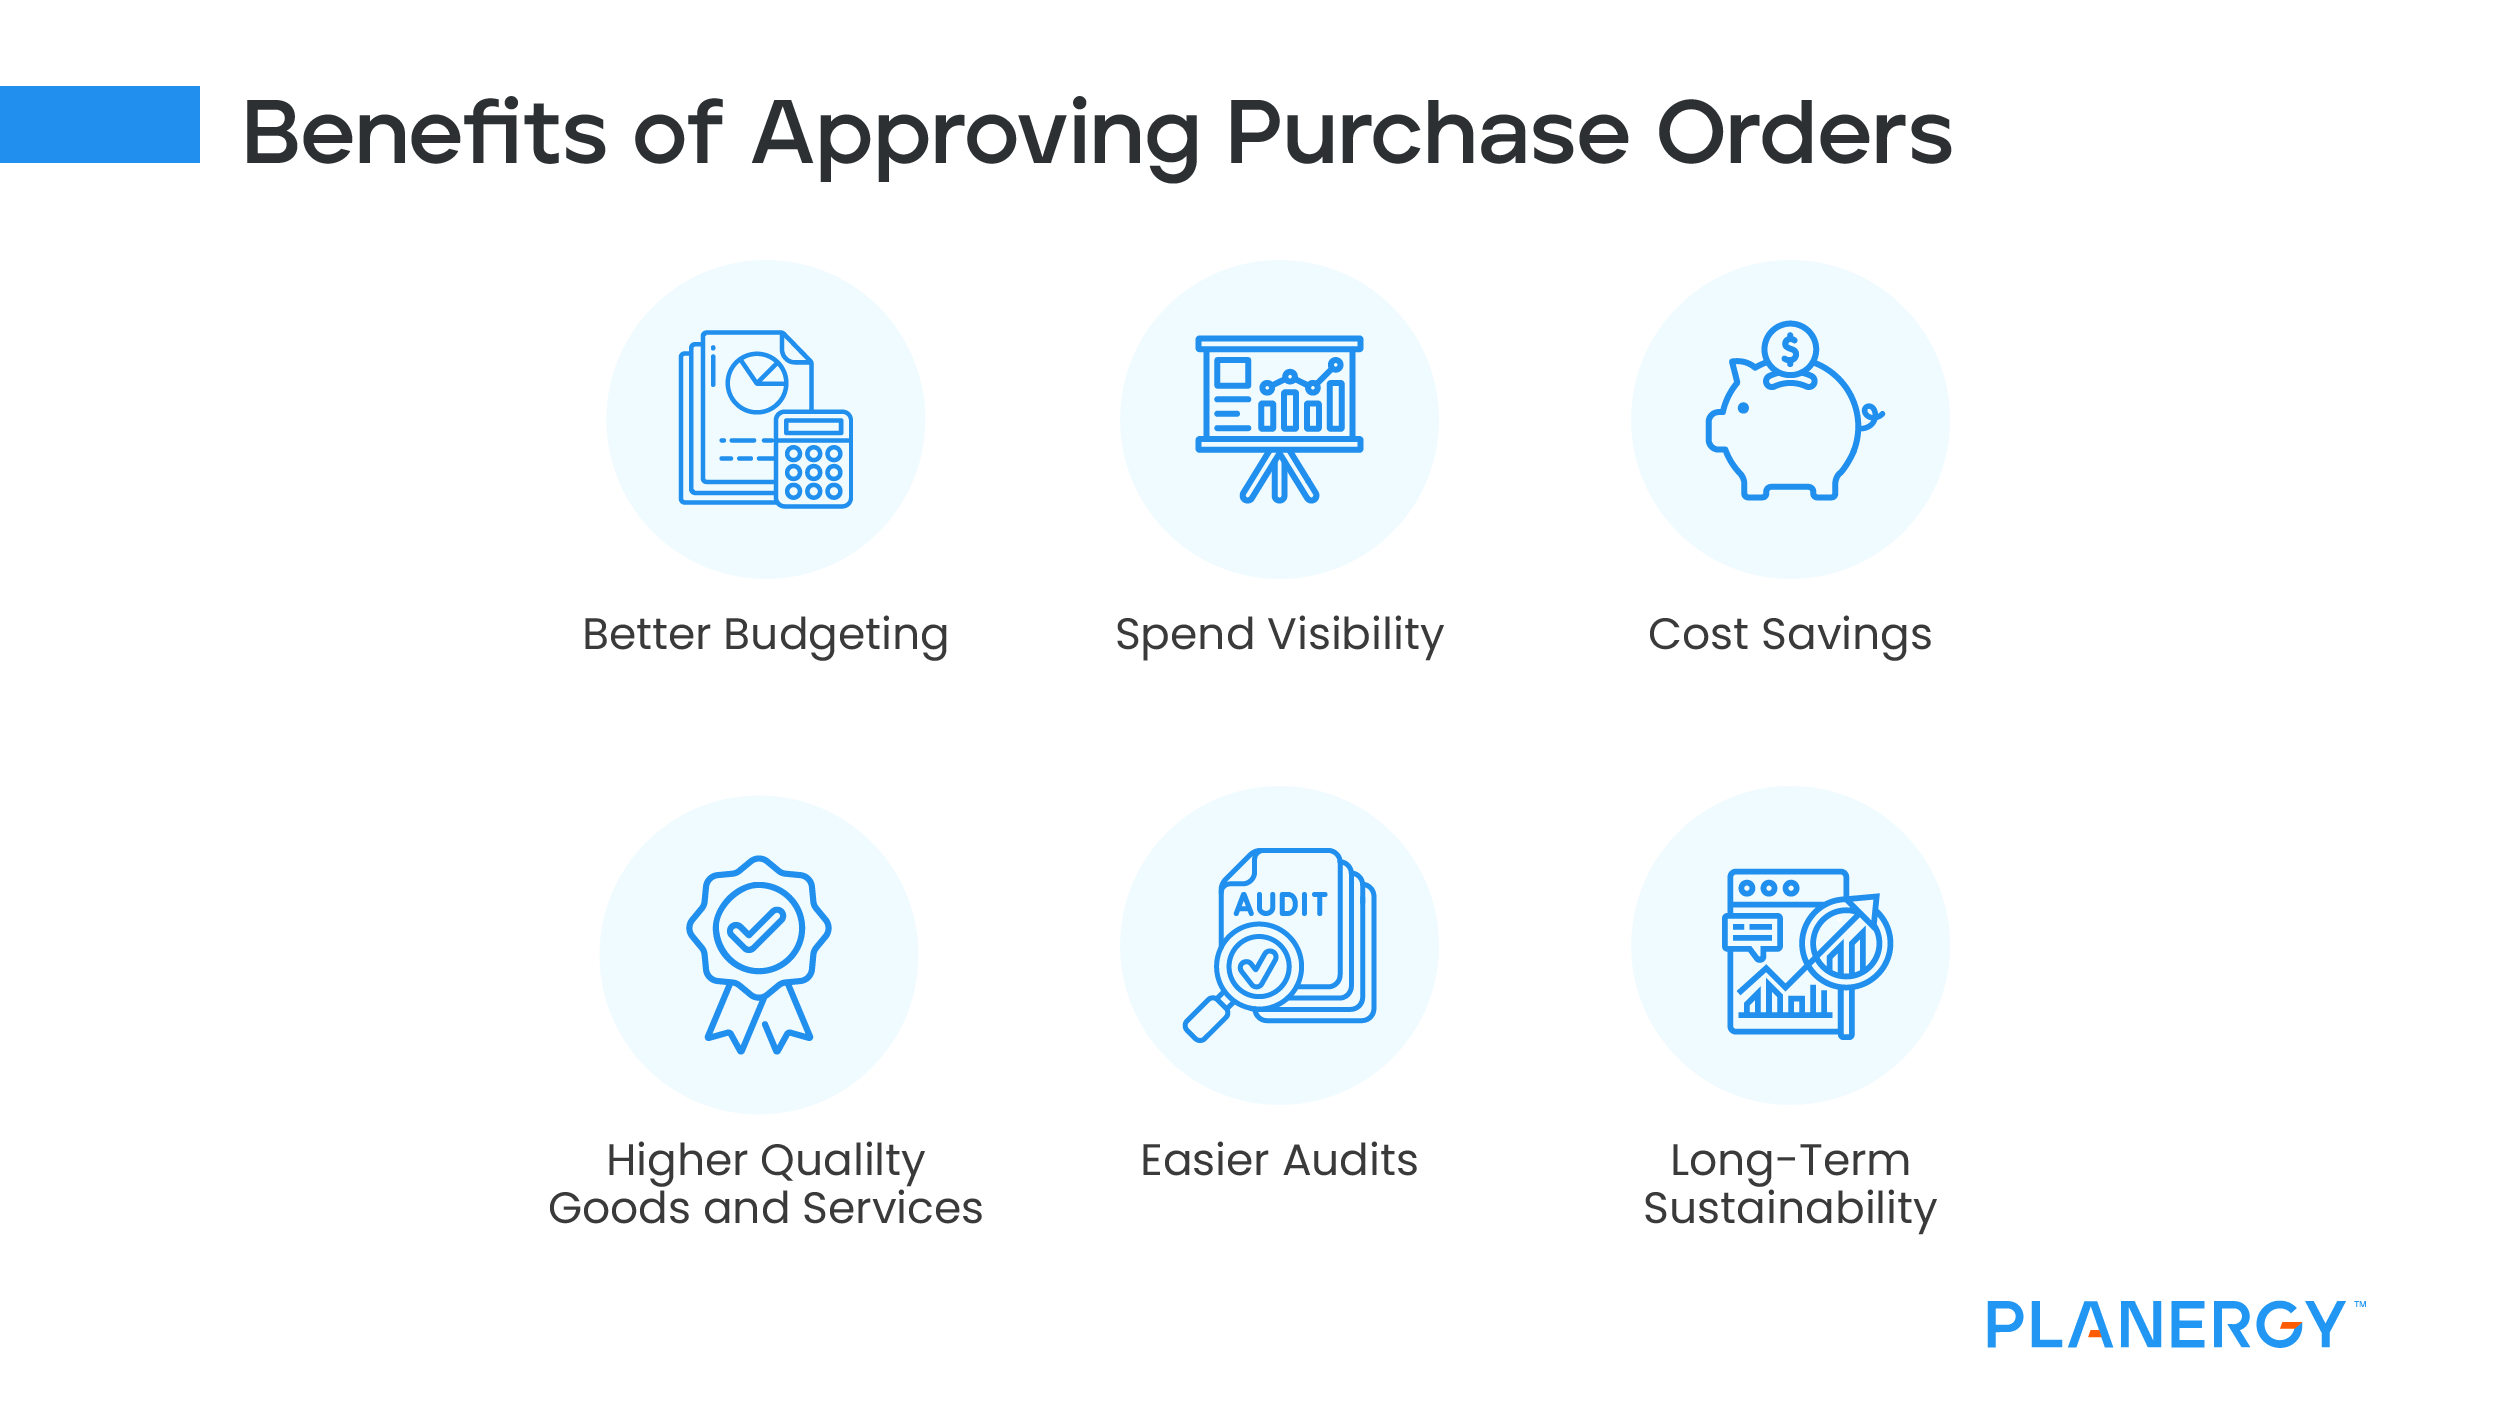 Benefits of Approving Purchase Orders